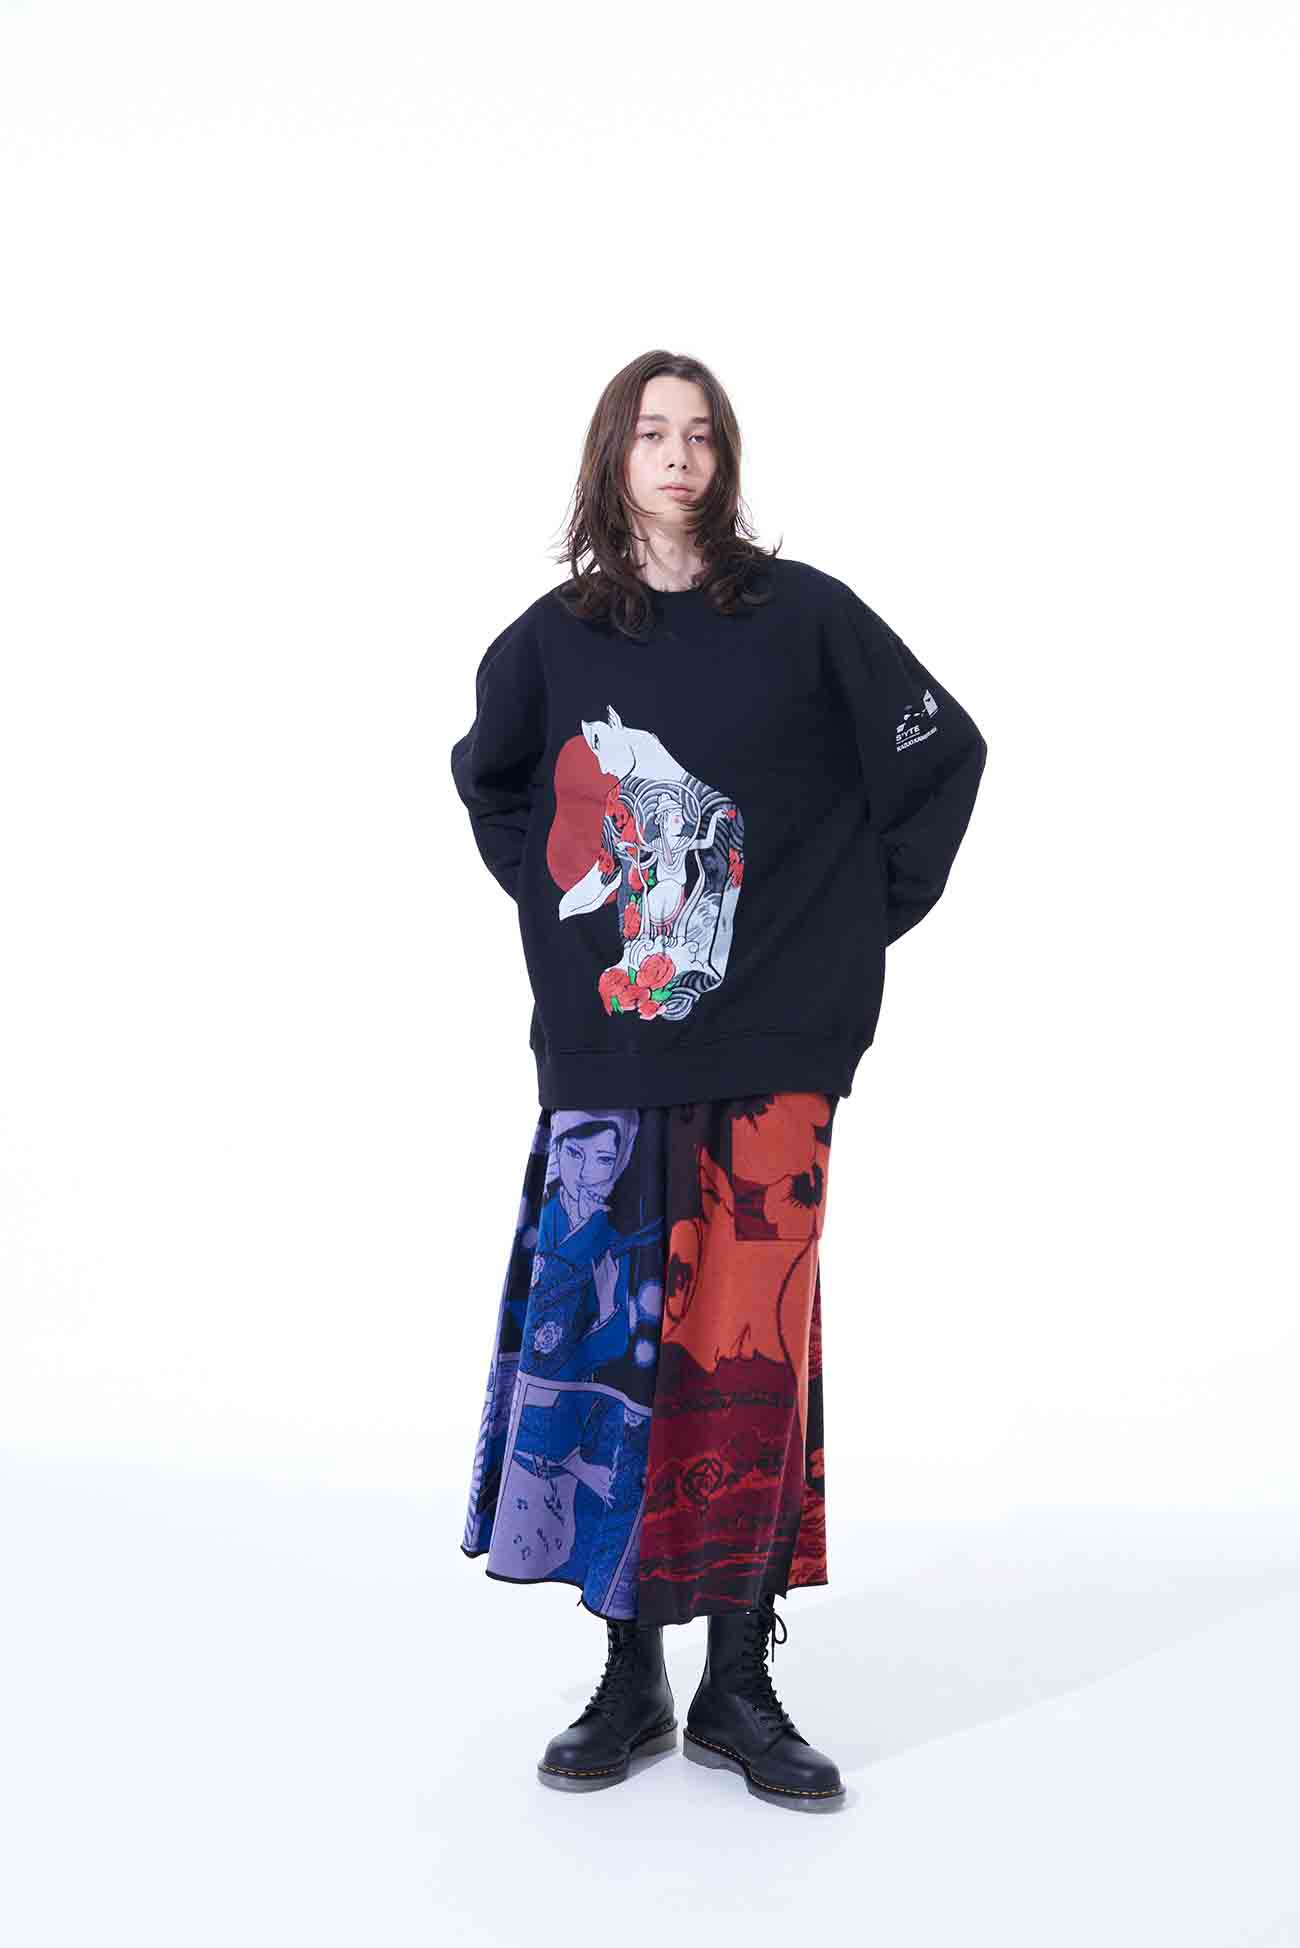 S'YTE x KAZUO KAMIMURA-TATTOO and WOMAN-FRENCH TERRY SWEAT SHIRT WITH PRINTED ILLUSTRATION